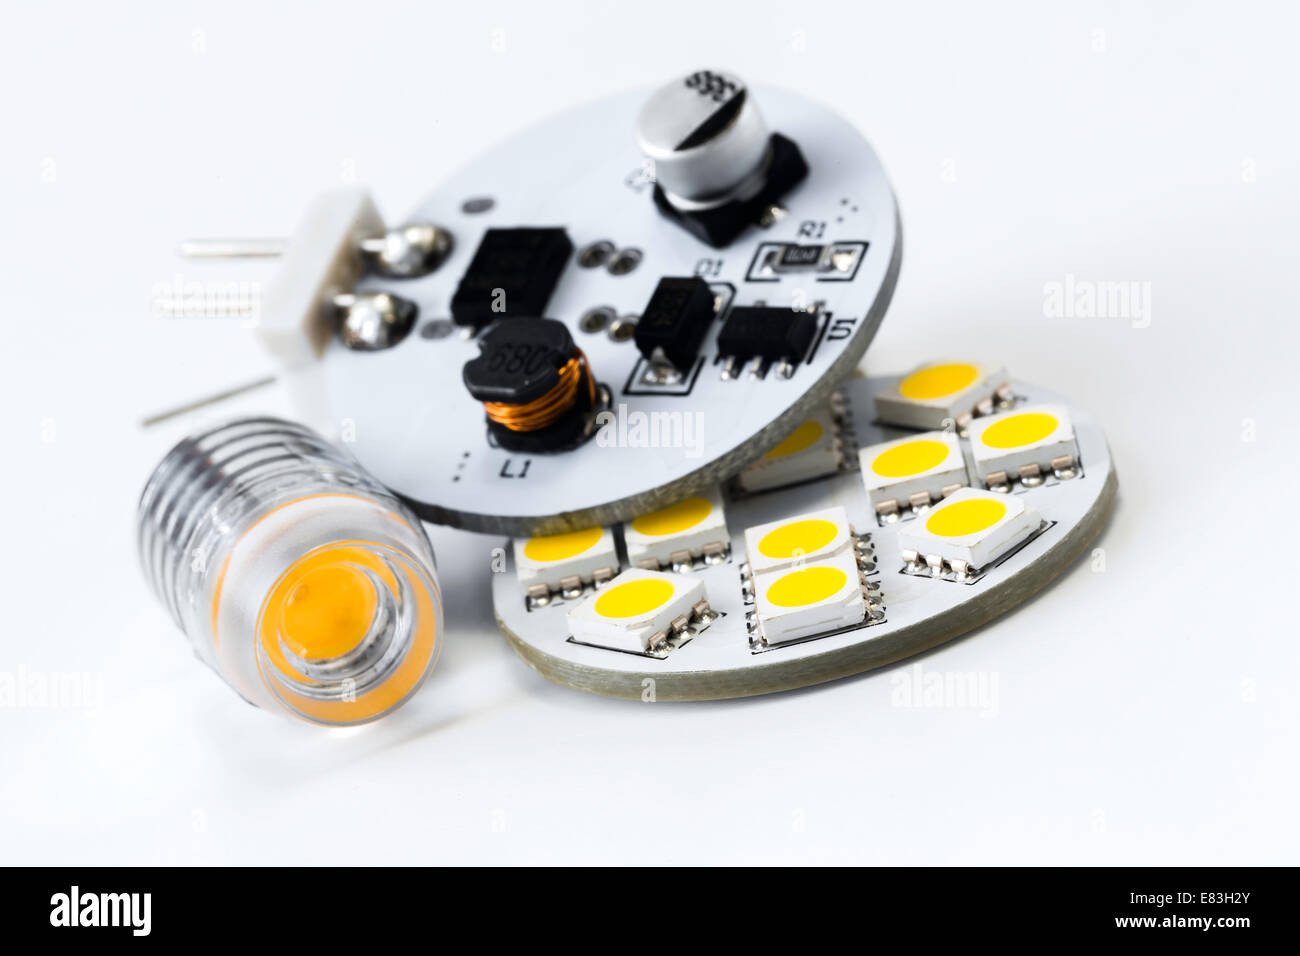 two different types of G4 LED bulbs and electronics side of led lights with 12 SMD chips Stock Photo